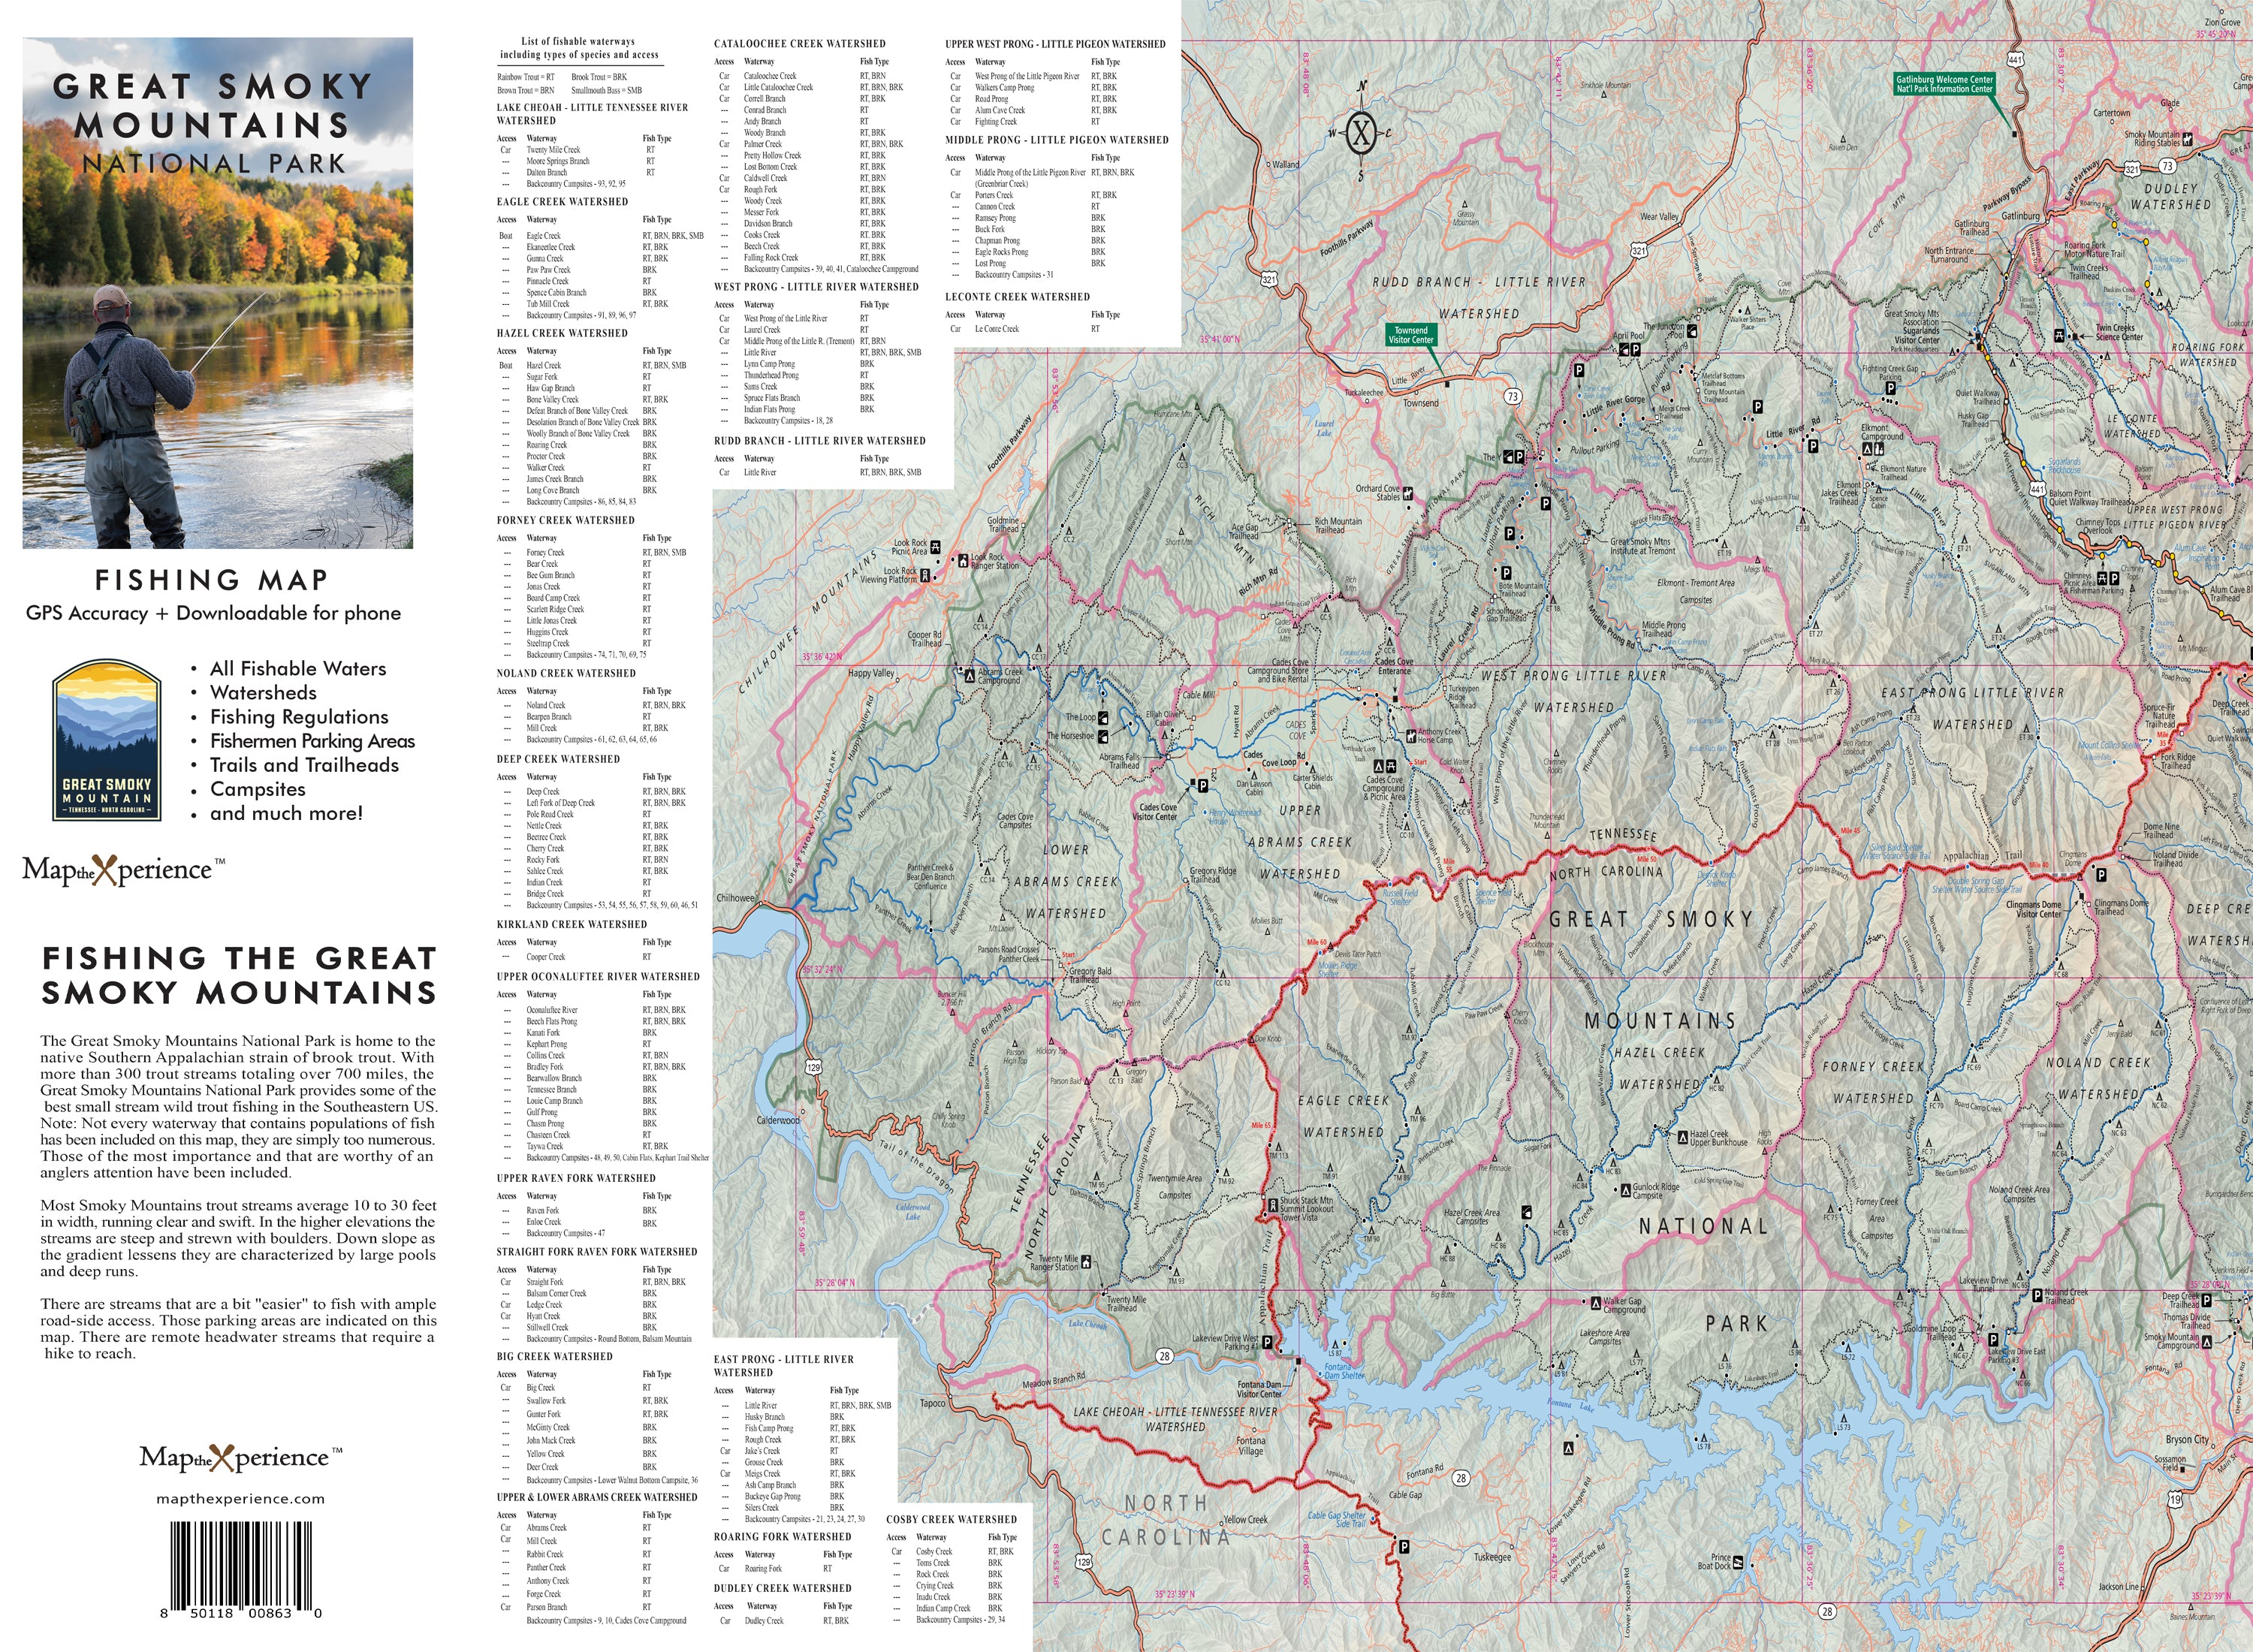 Unleash the Adventure with the Great Smoky Mountains National Park Fishing Map